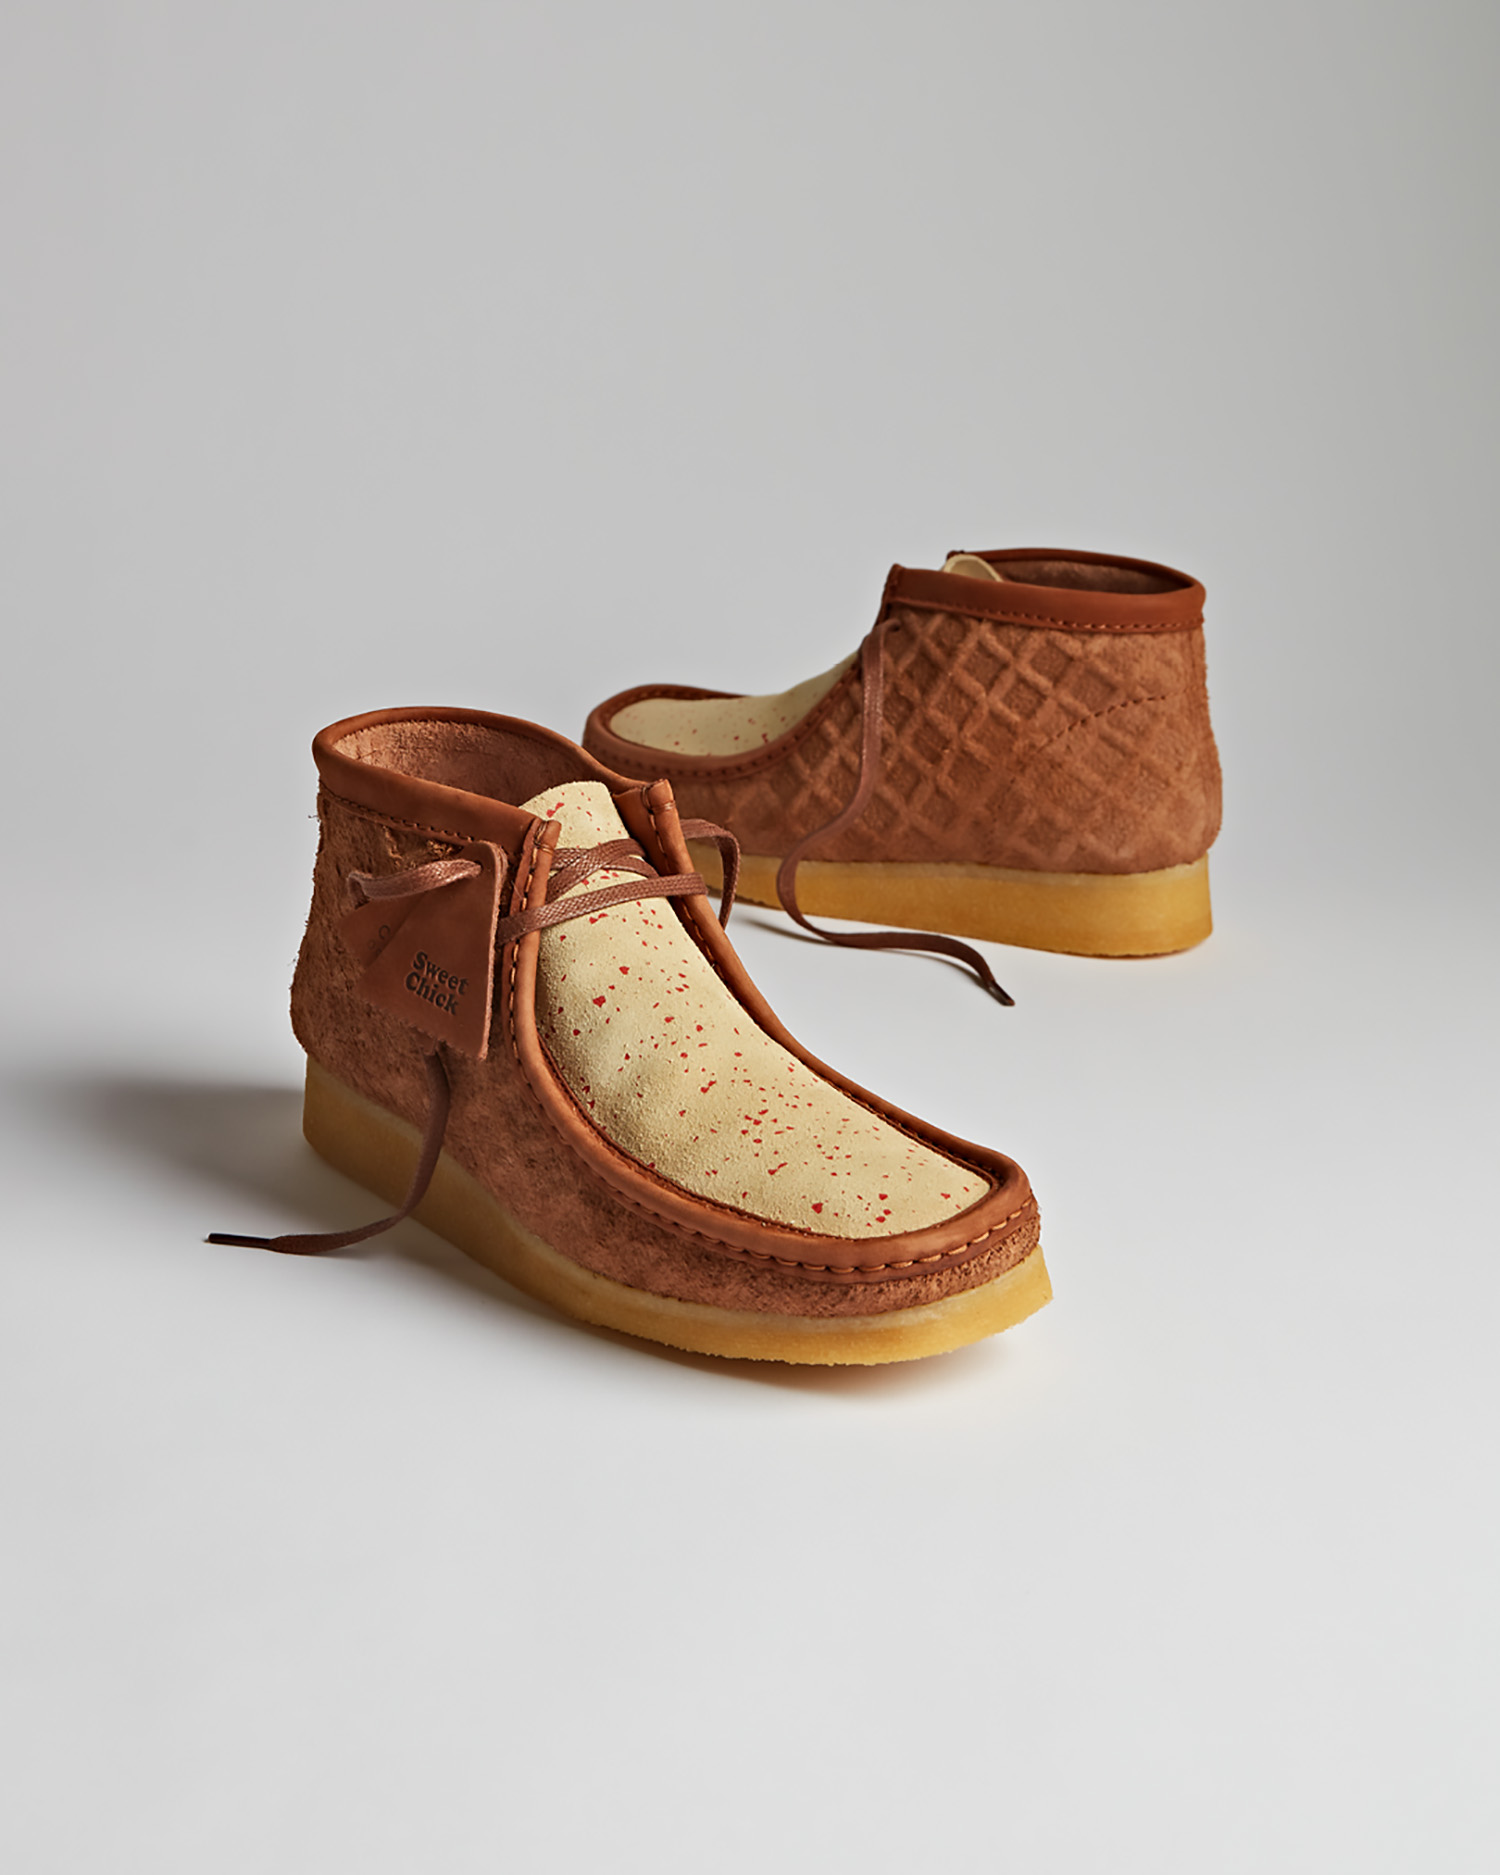 CLARKS ORIGINALS × SWEET CHICK COLLABORATION | SWAG 